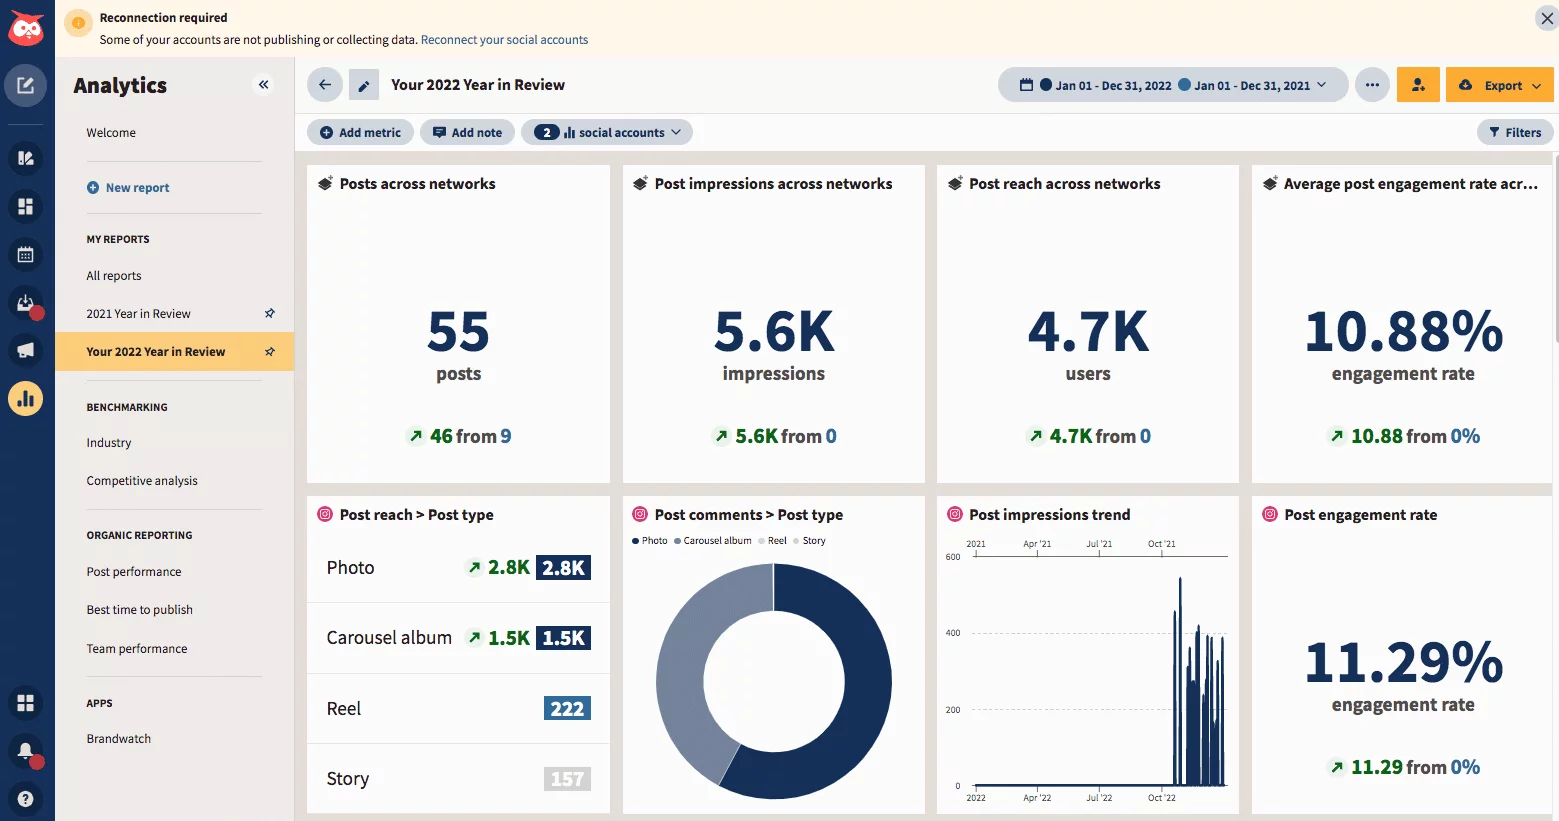 Hootsuite analytics tool featuring 2022 Year in Review